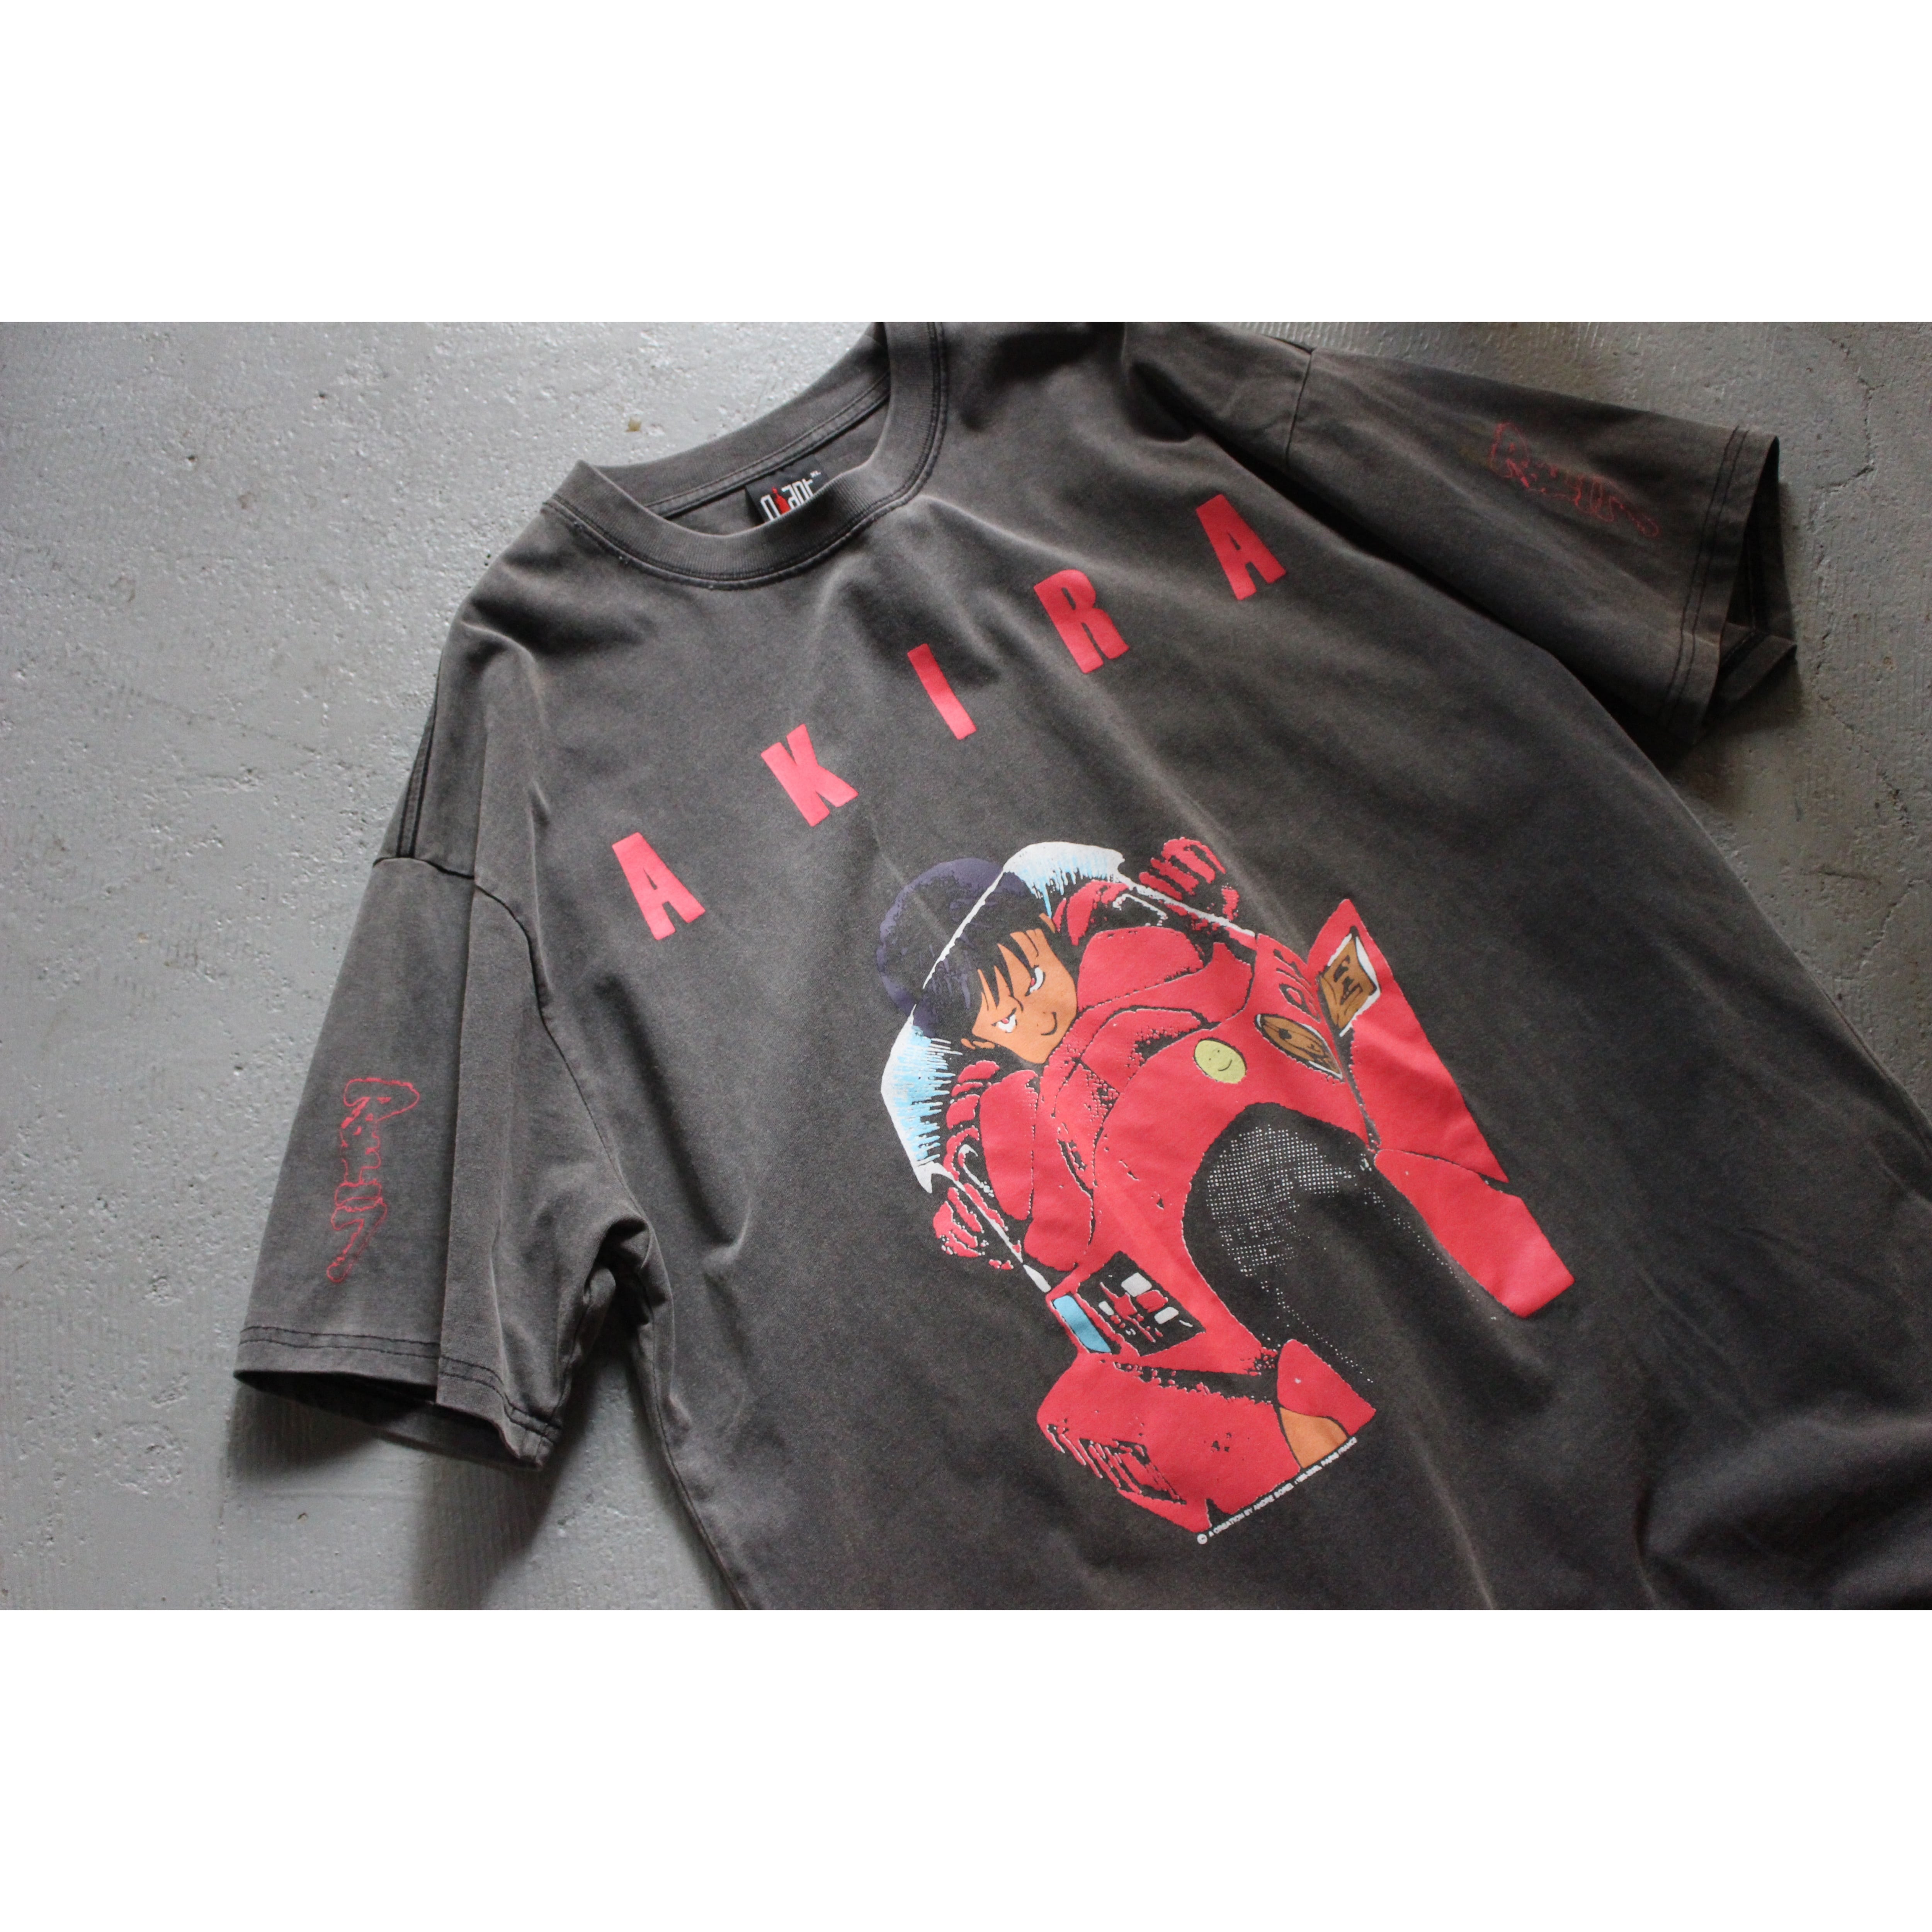 90's AKIRA Tee | aNz used & vintage clothing shop